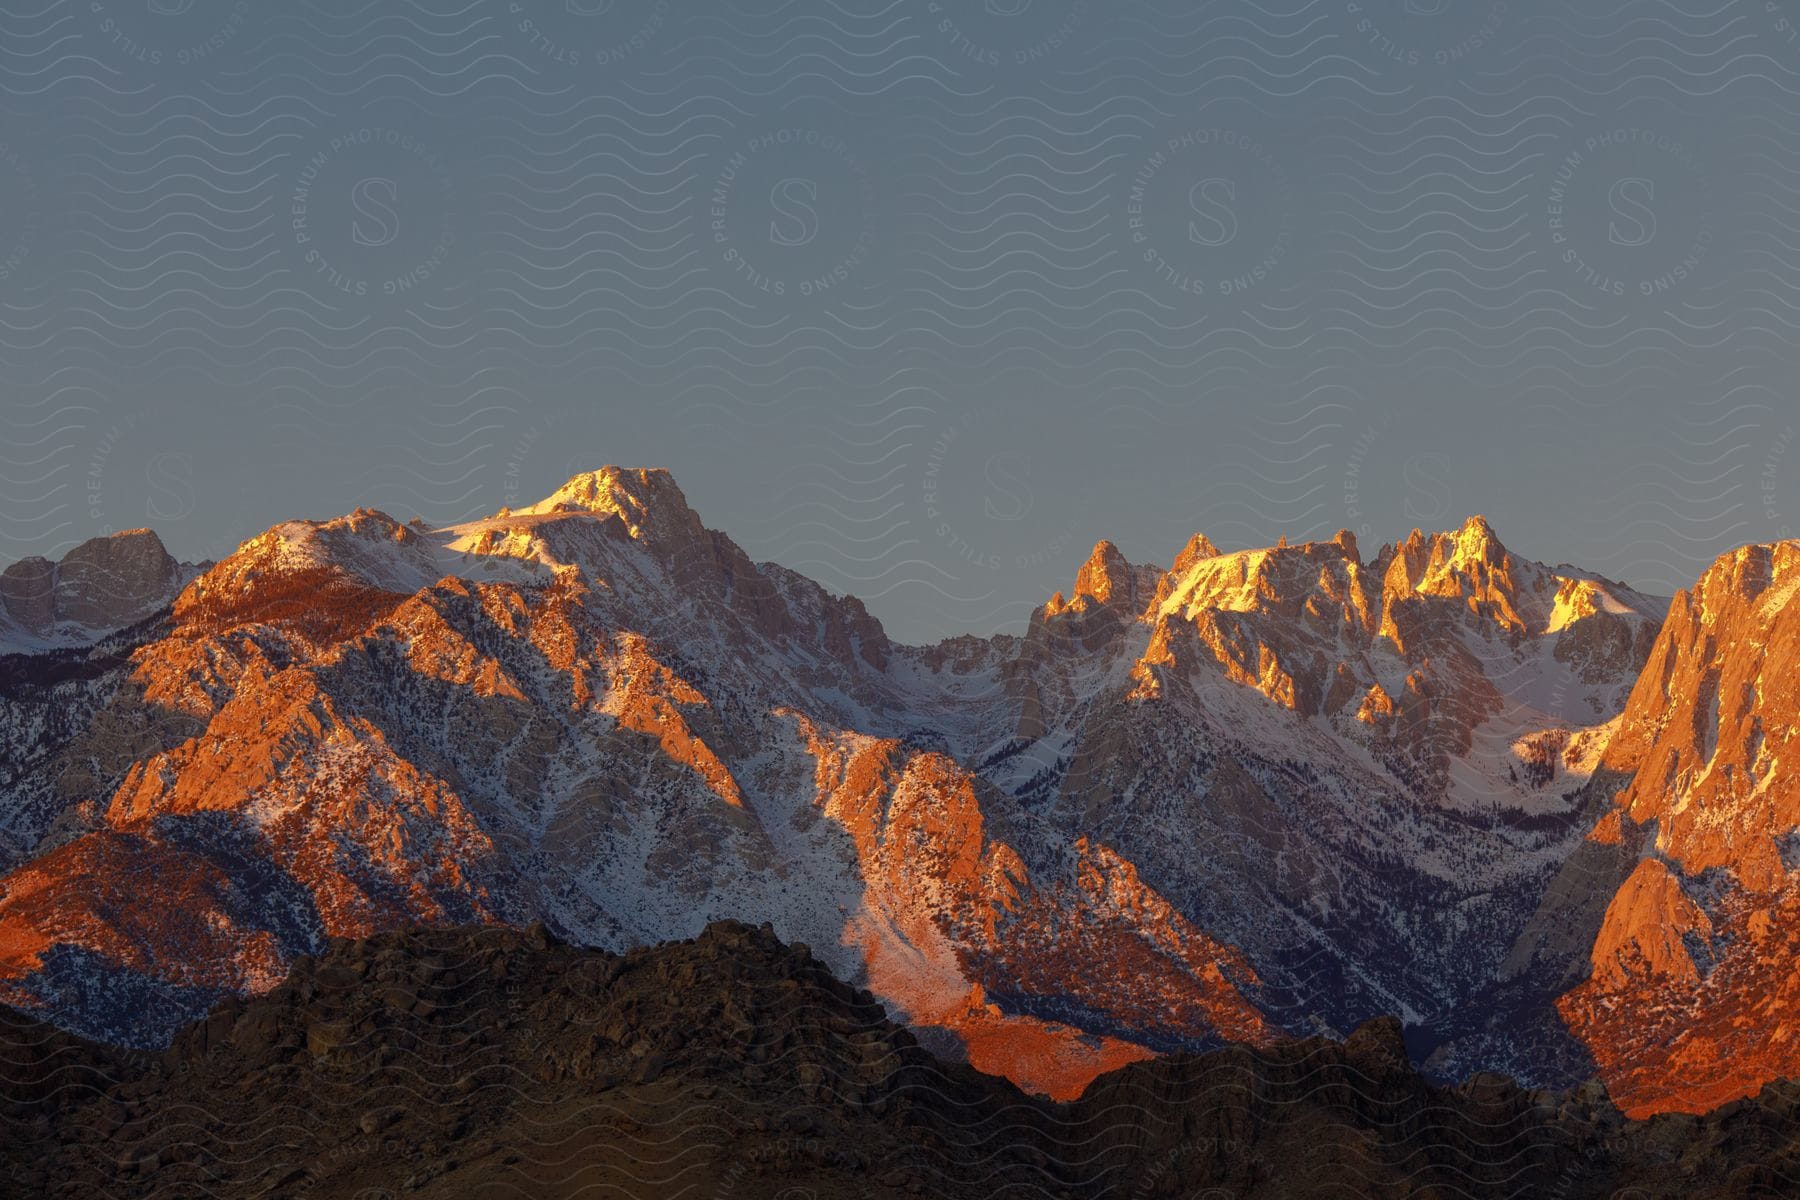 Snowcovered mountain range with colorful sunset or sunrise and soil in the foreground on a cloudless winter day